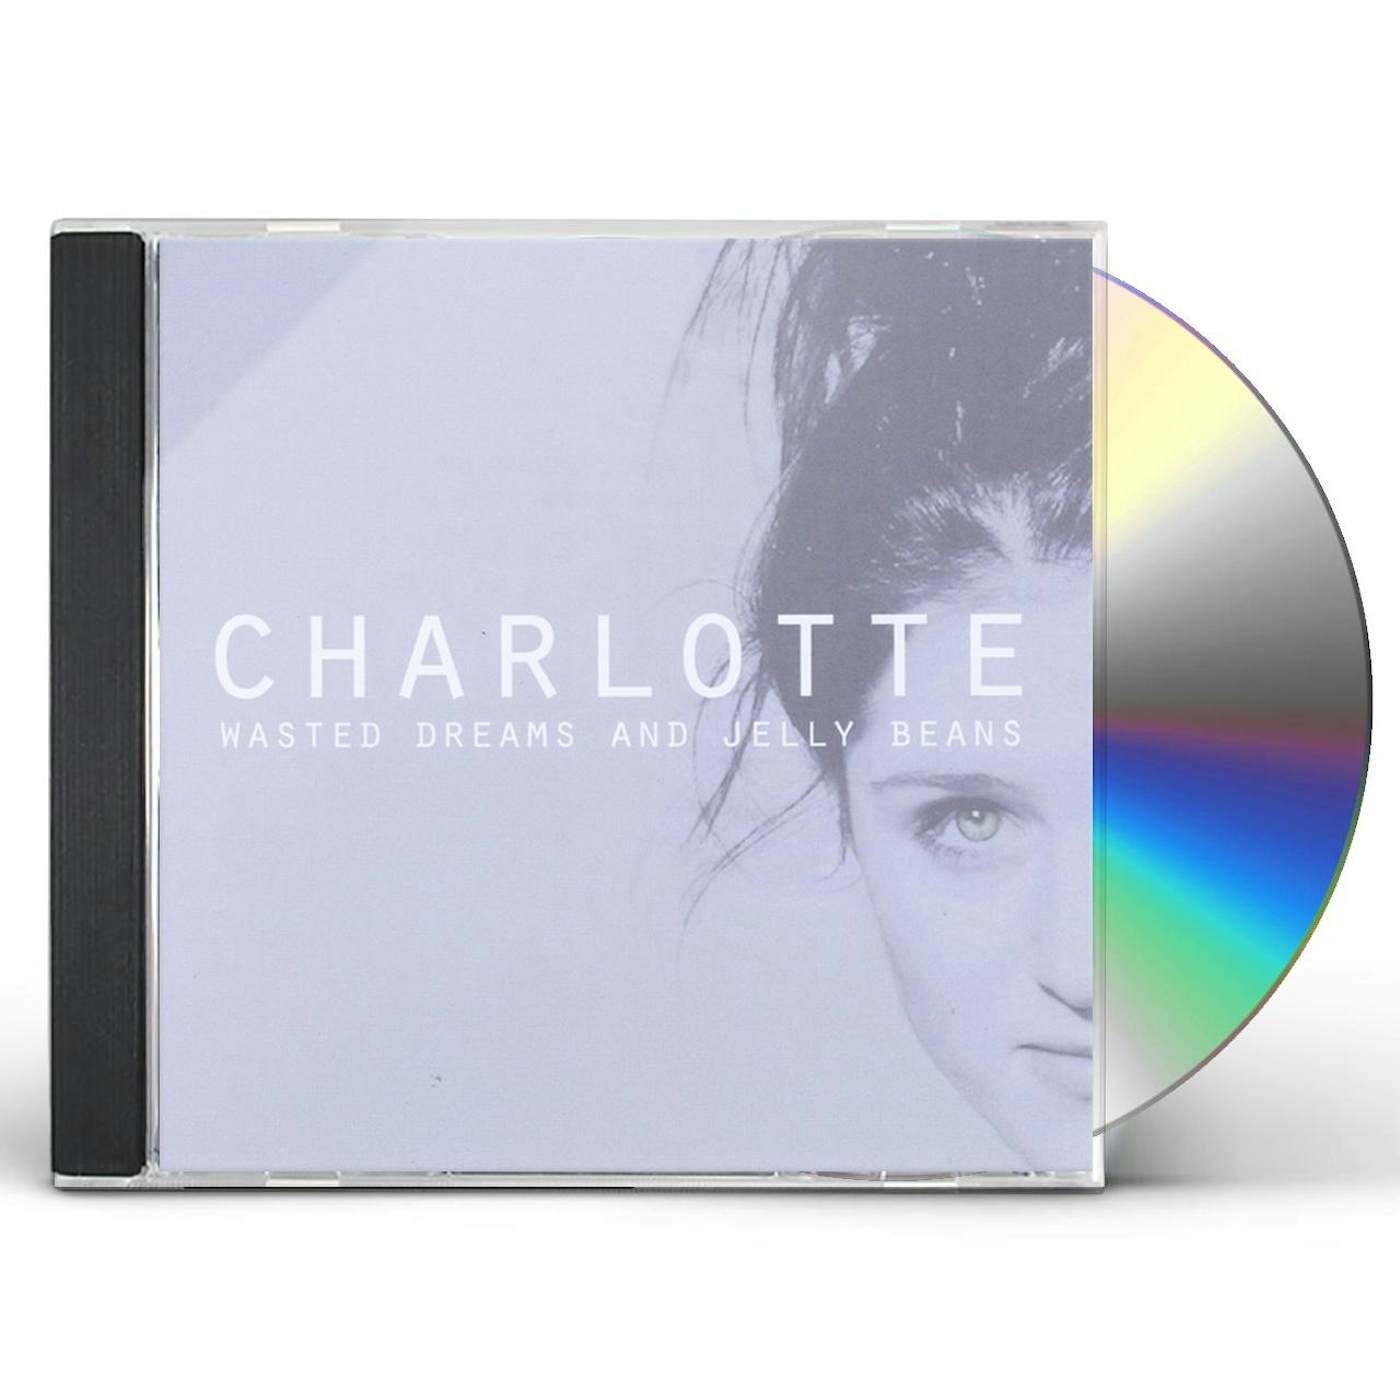 Charlotte WASTED DREAMS & JELLY BEANS CD